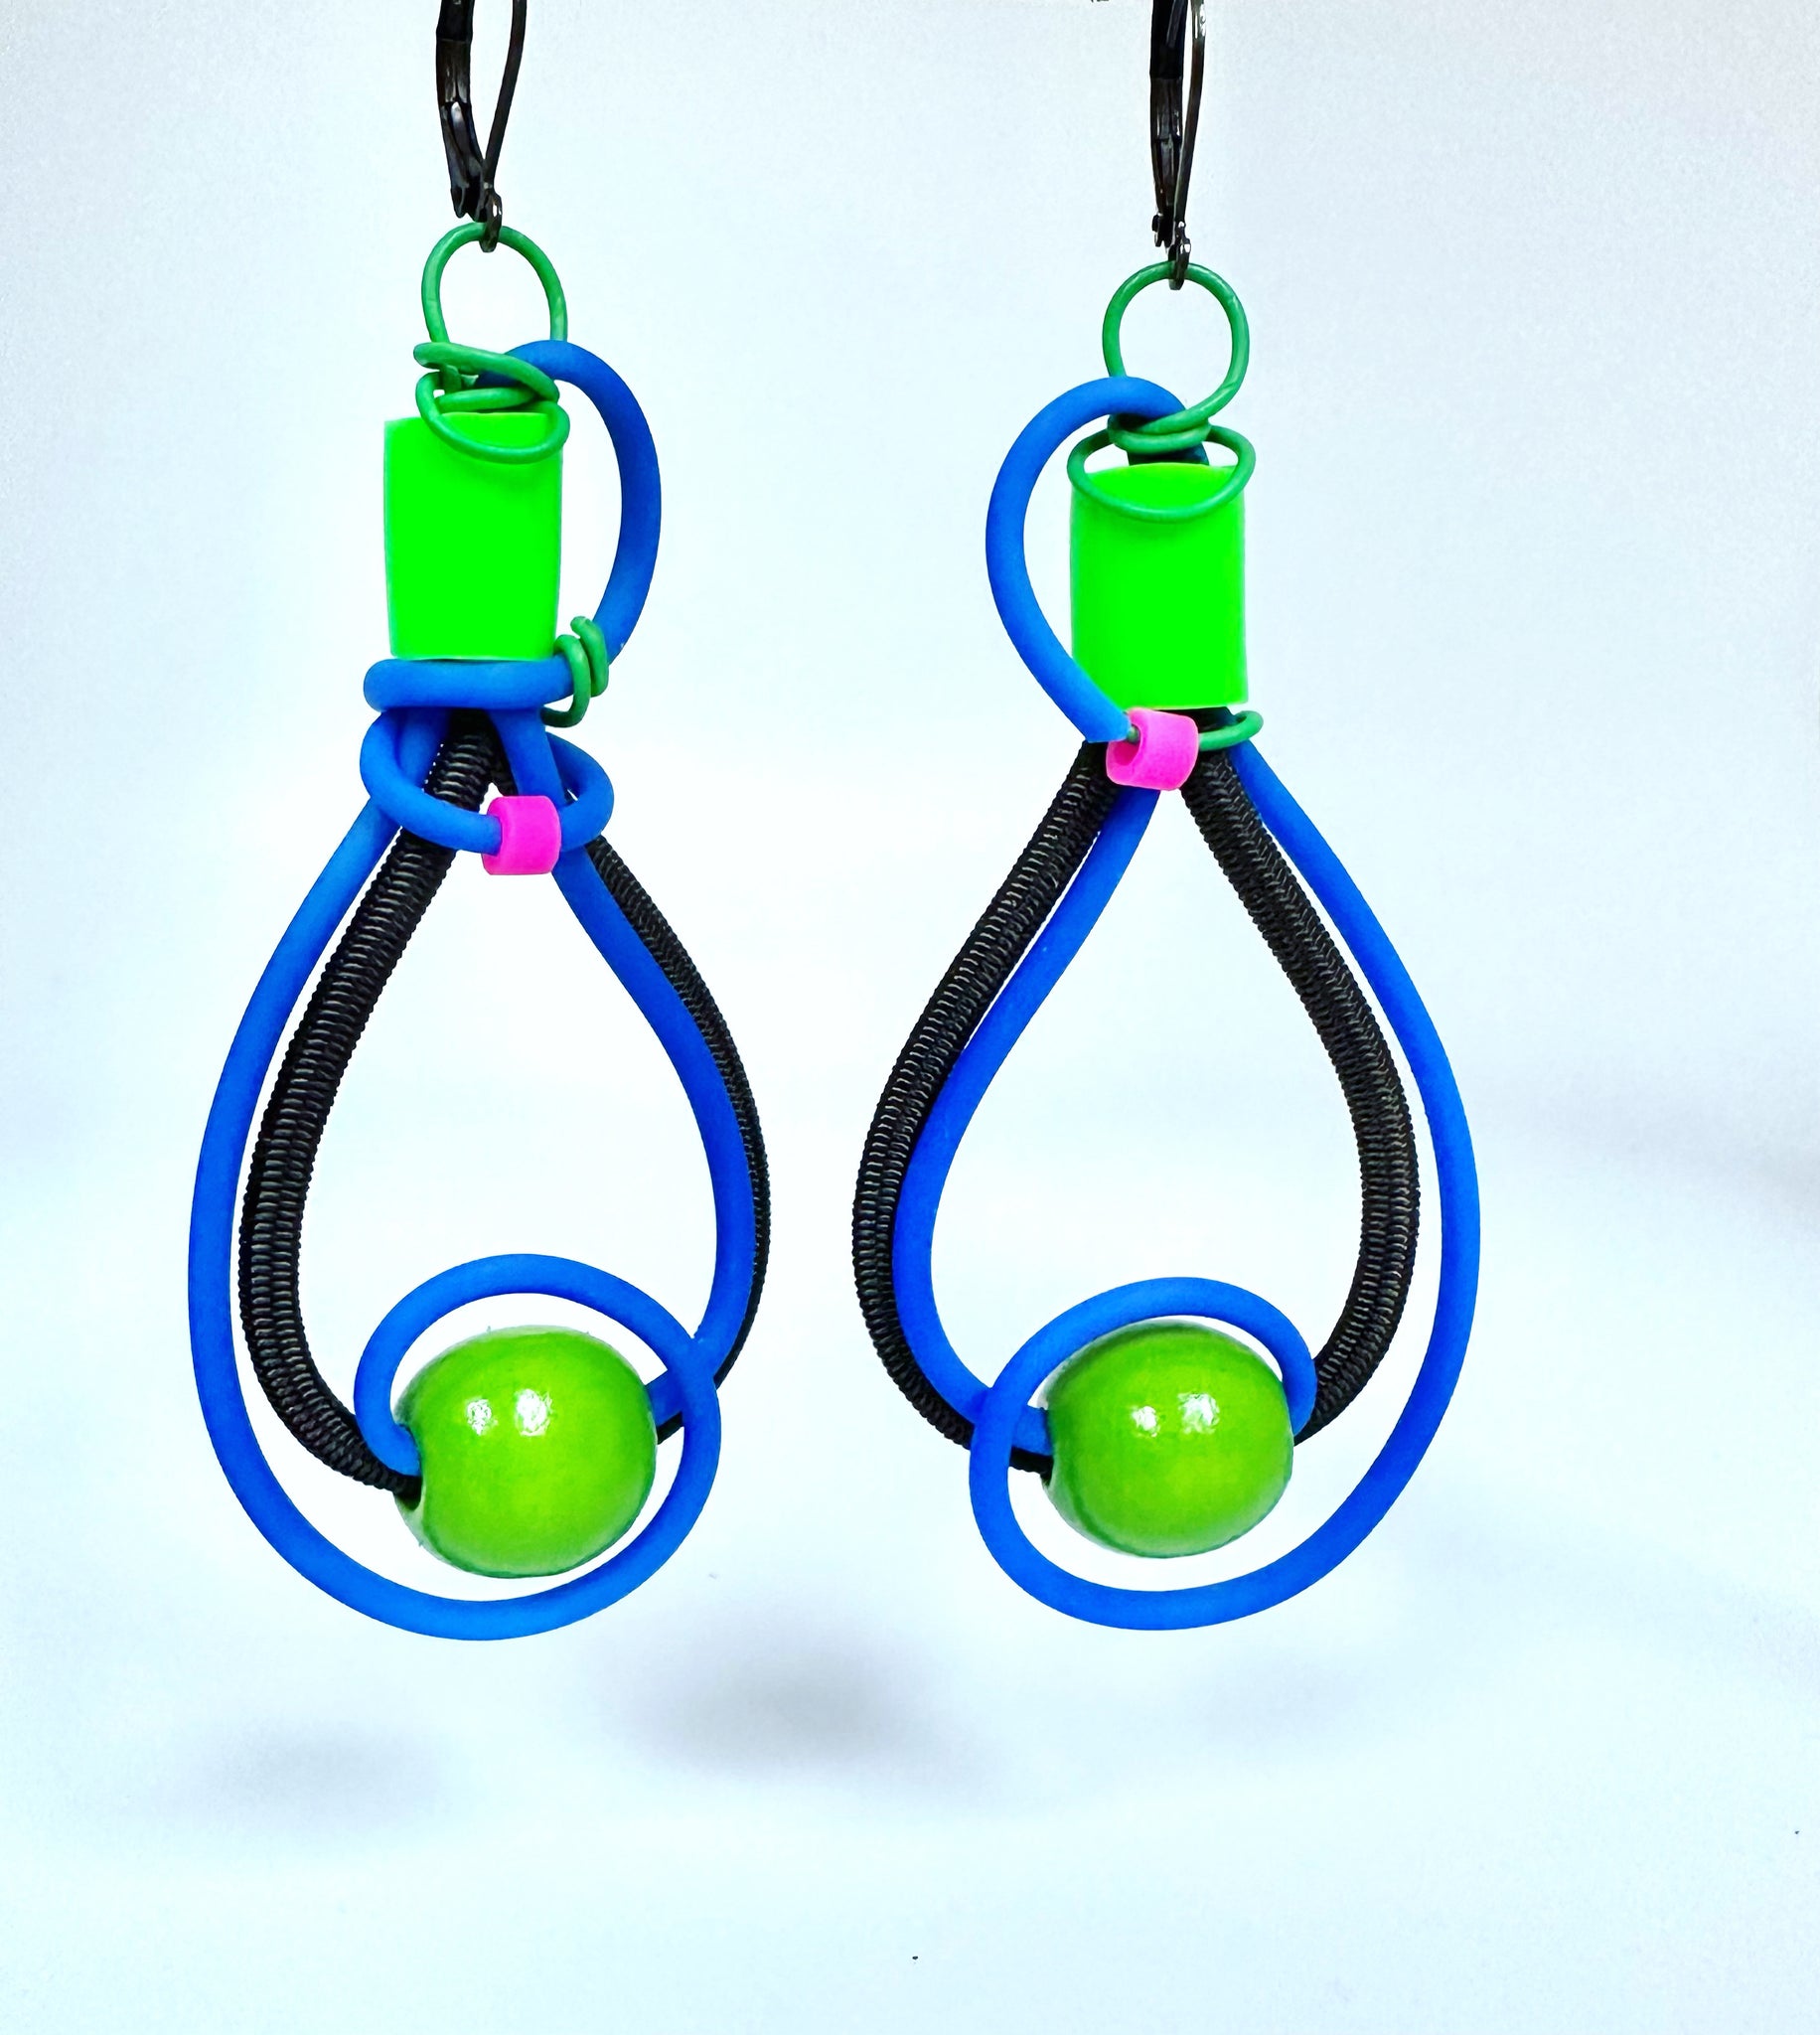 Once made earrings in blue and green